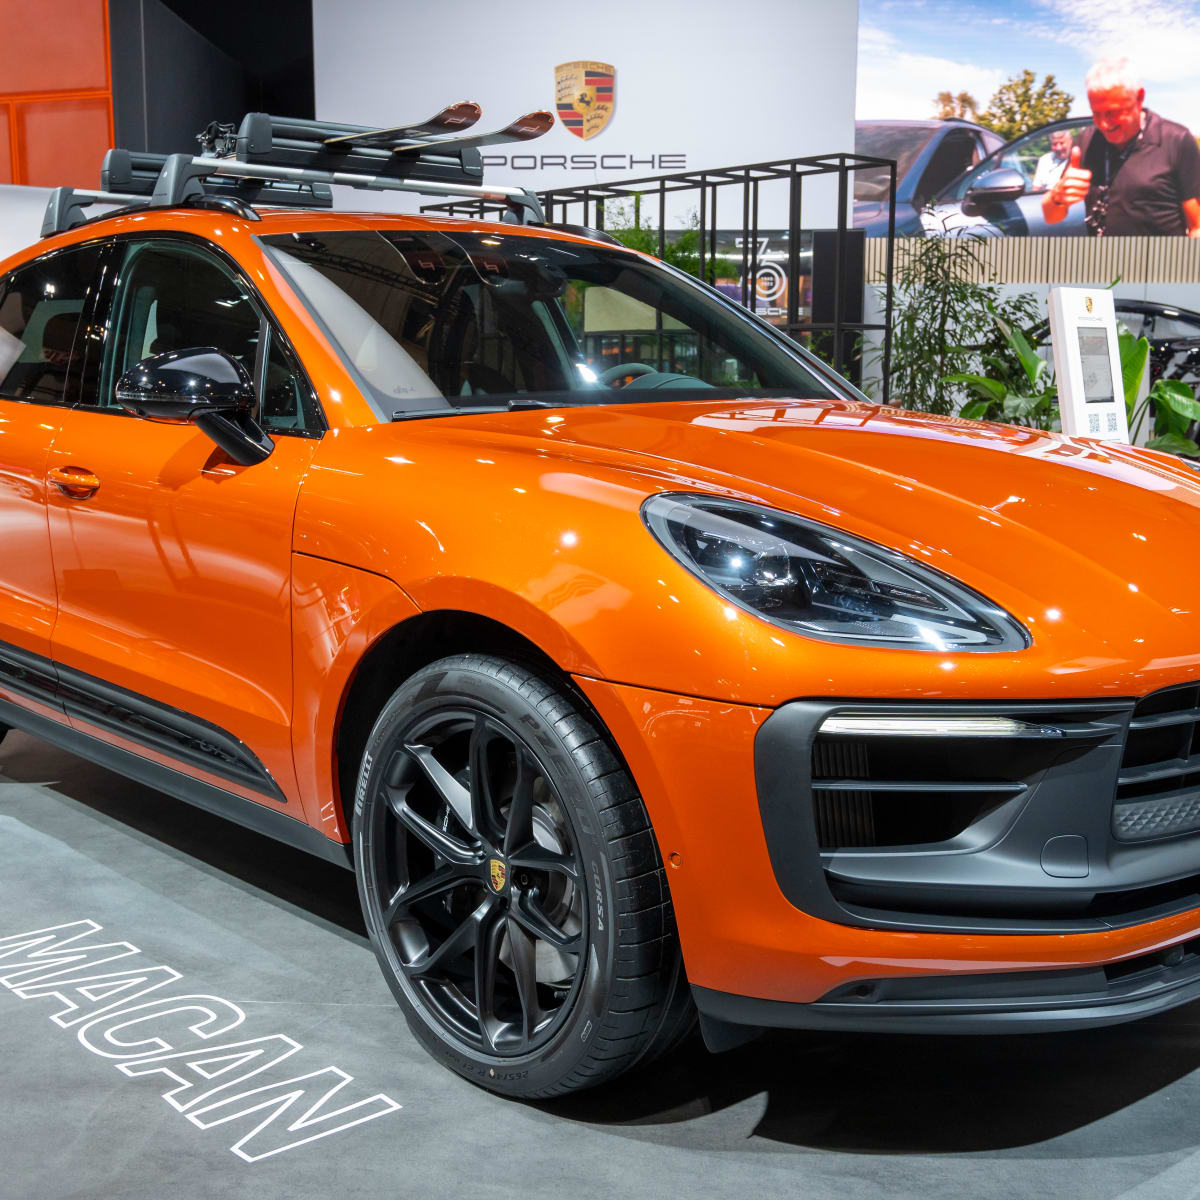 Chinese EVs sparking renaissance in styling, Porsche's Mauer says